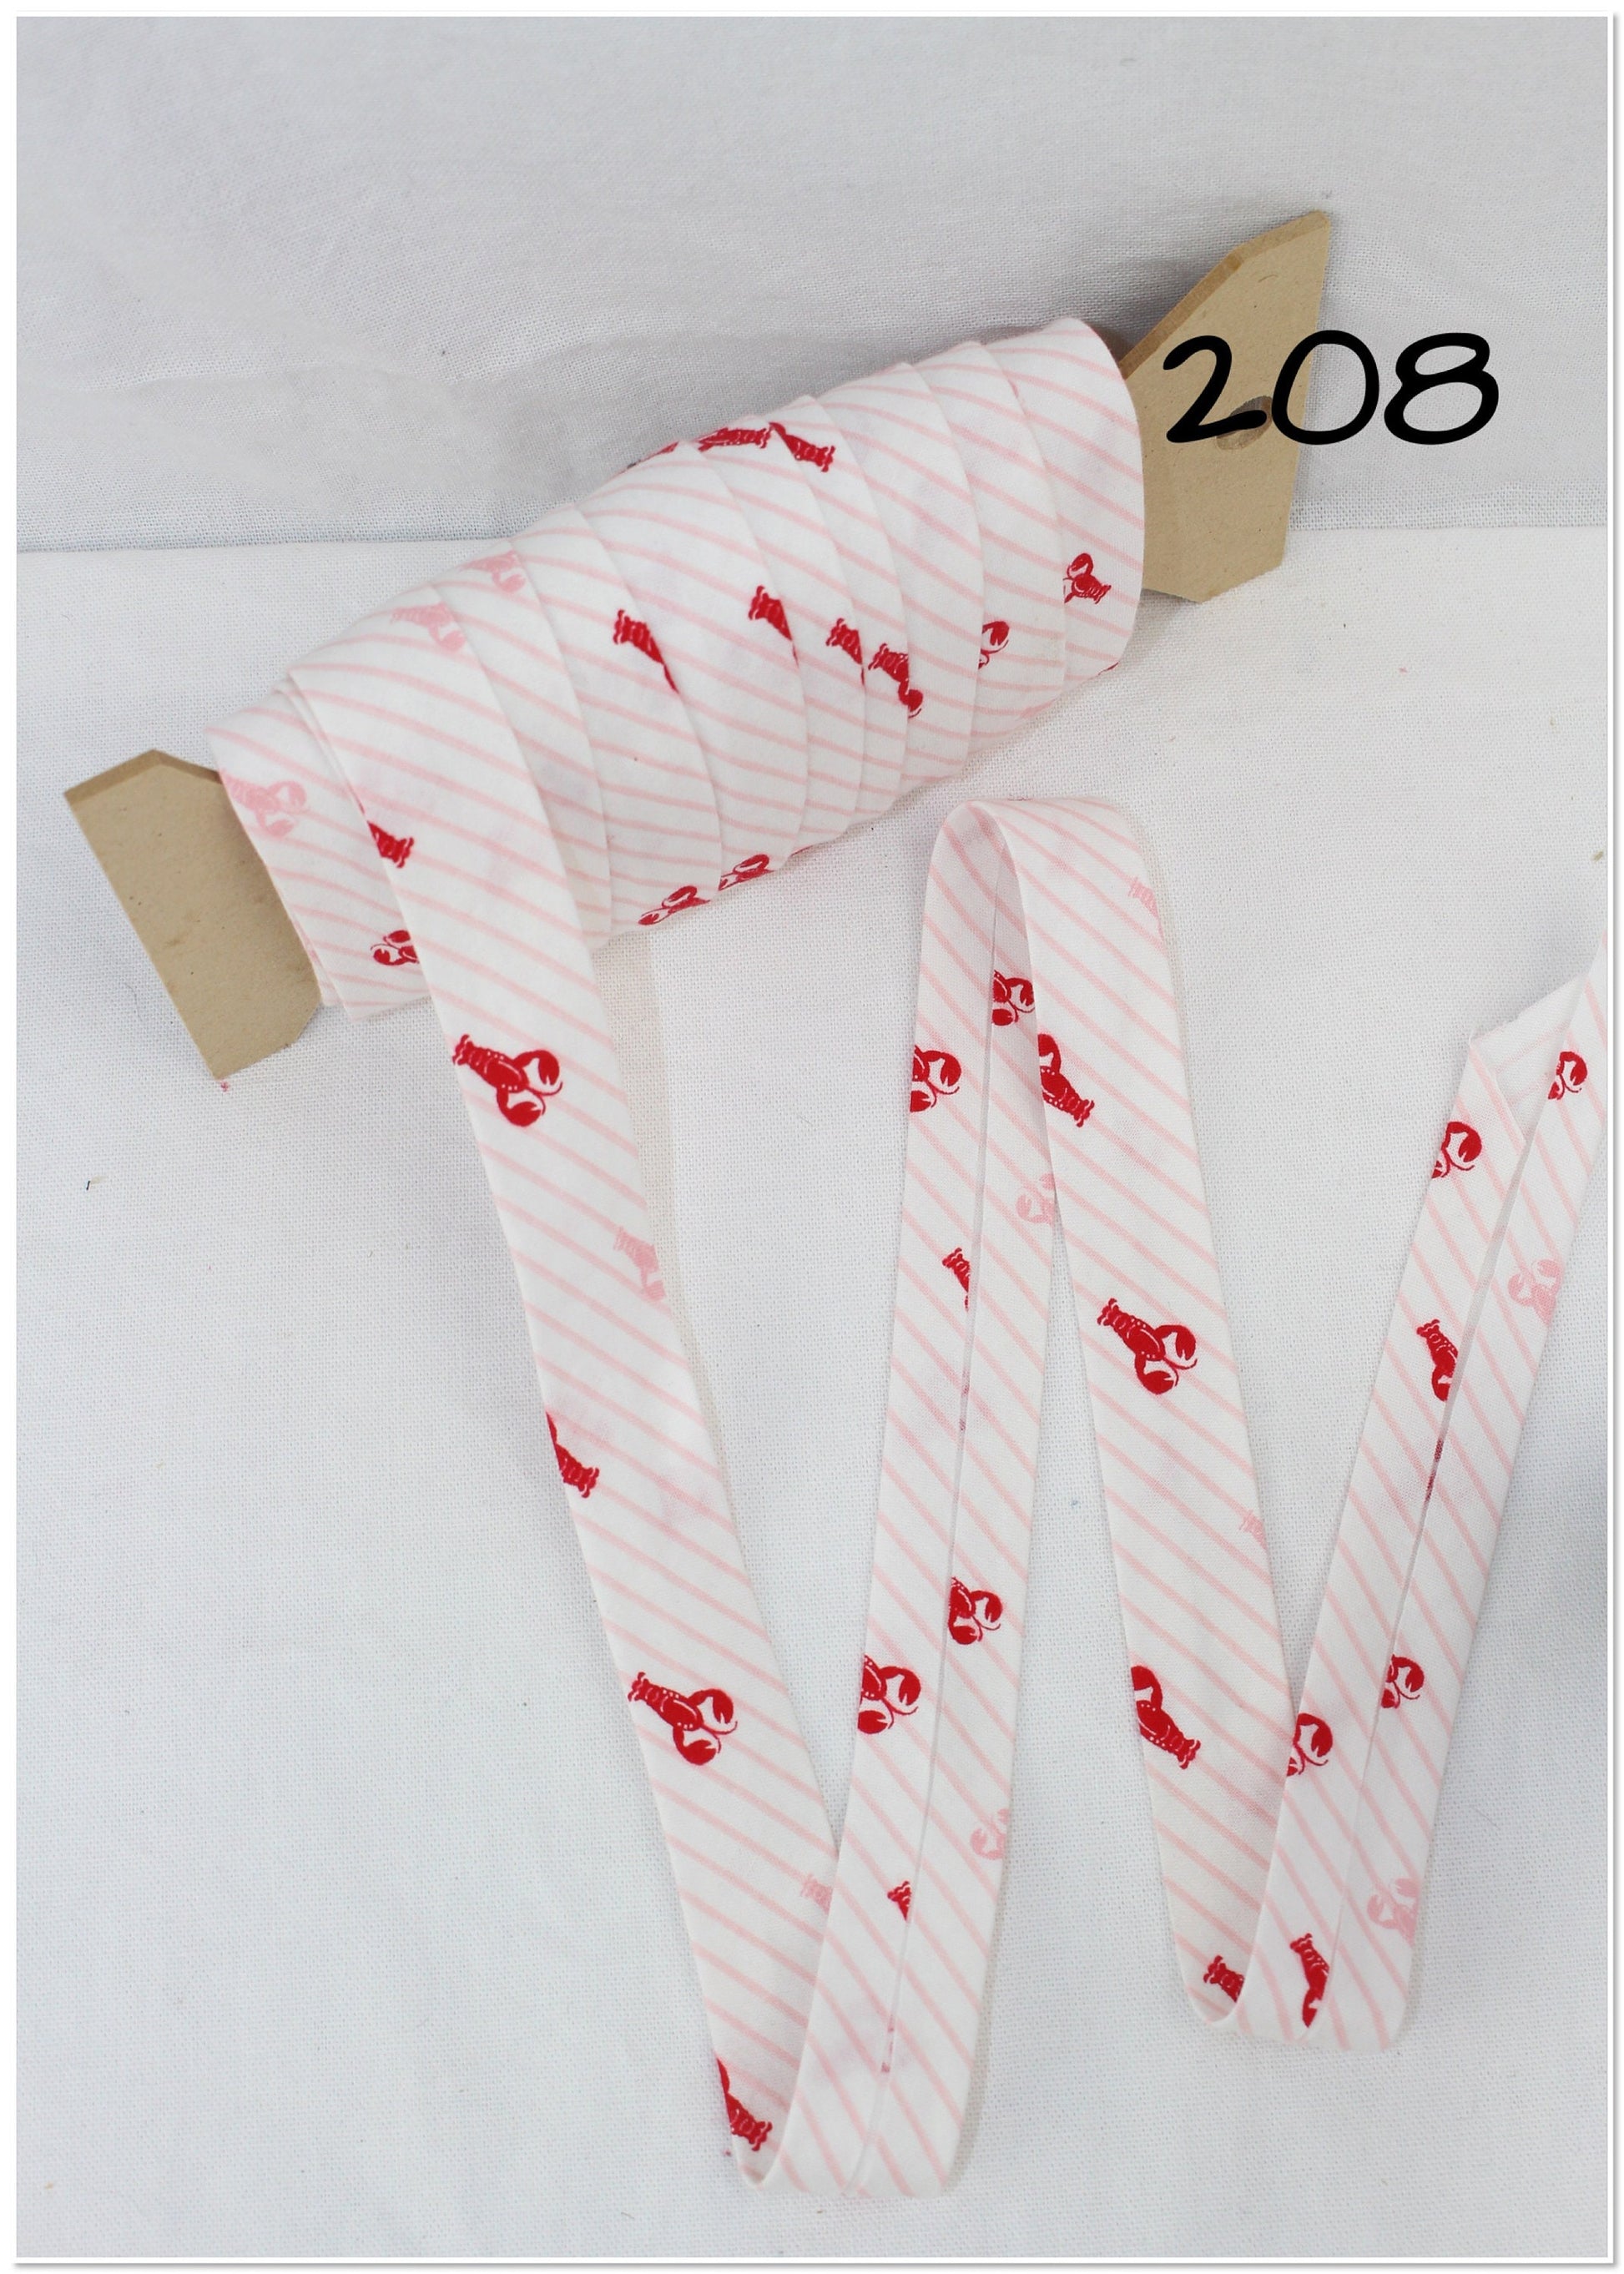 Bias Binding (Tape) 25mm, Cotton, Single Fold, cows and moon, kittens, lobsters, patterned. Fusible iron on available.